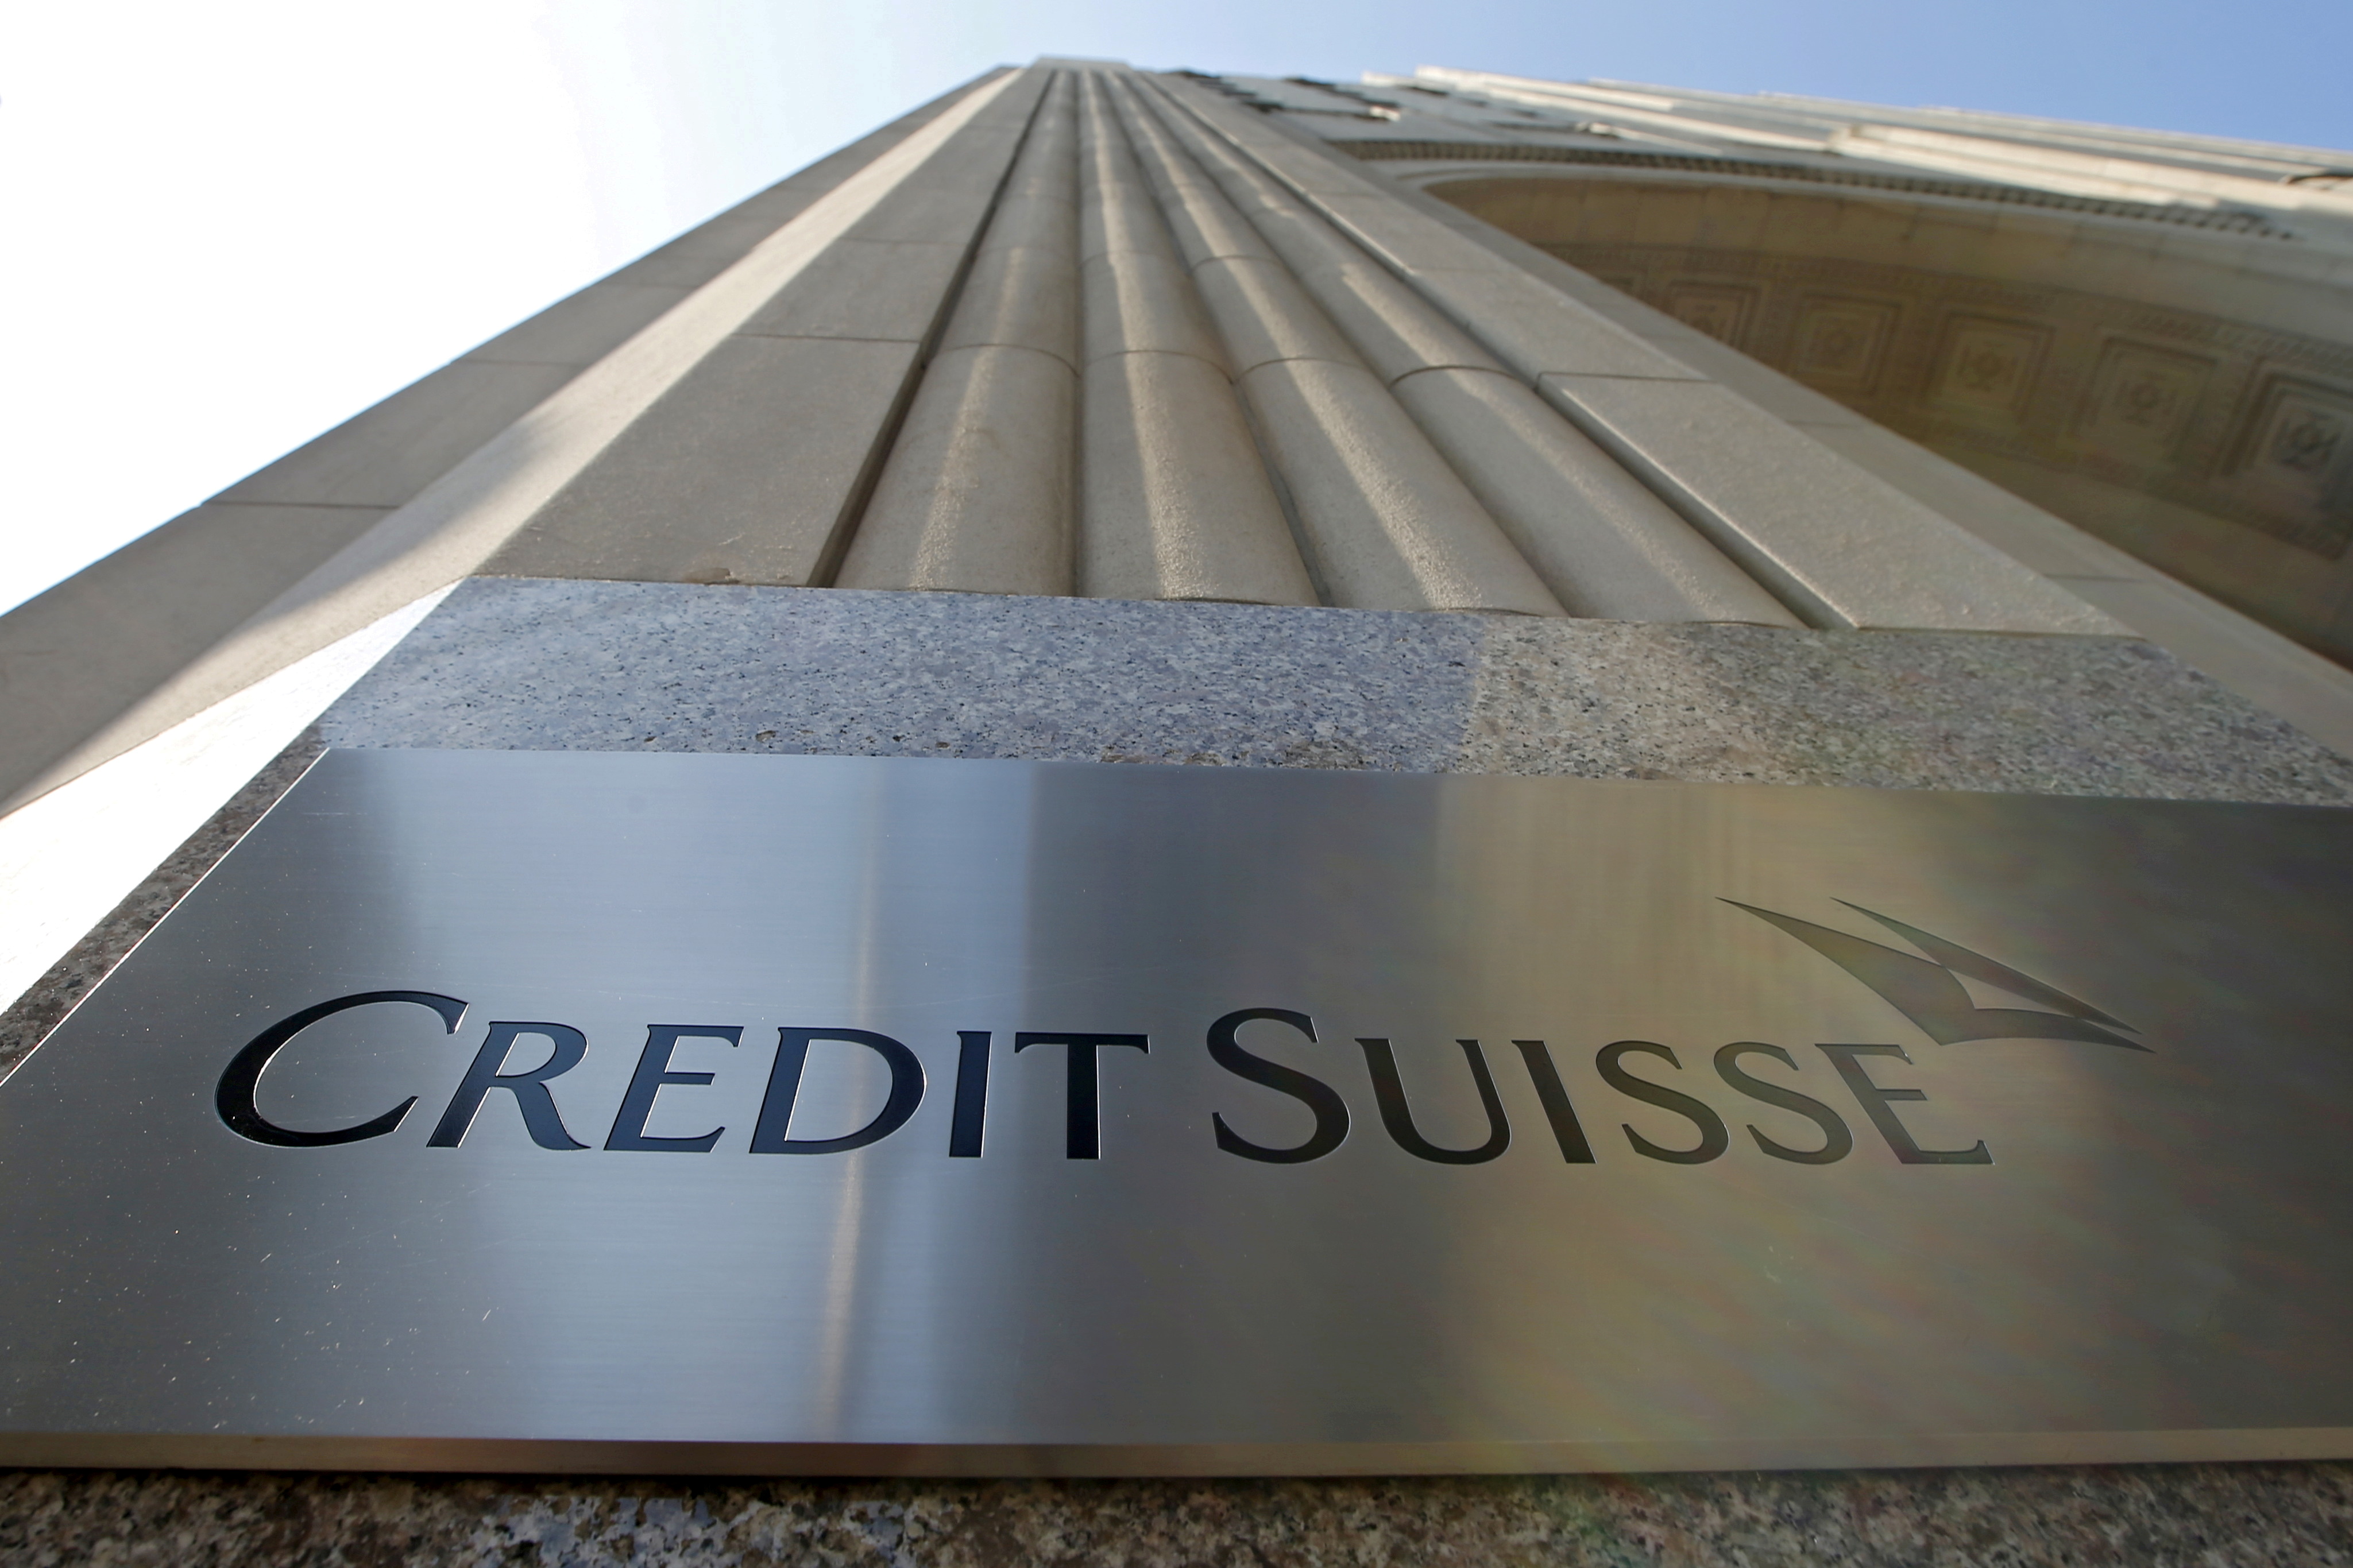 A Credit Suisse sign is seen on the exterior of their Americas headquarters in the Manhattan borough of New York City, September 1, 2015. REUTERS/Mike Segar/File Photo